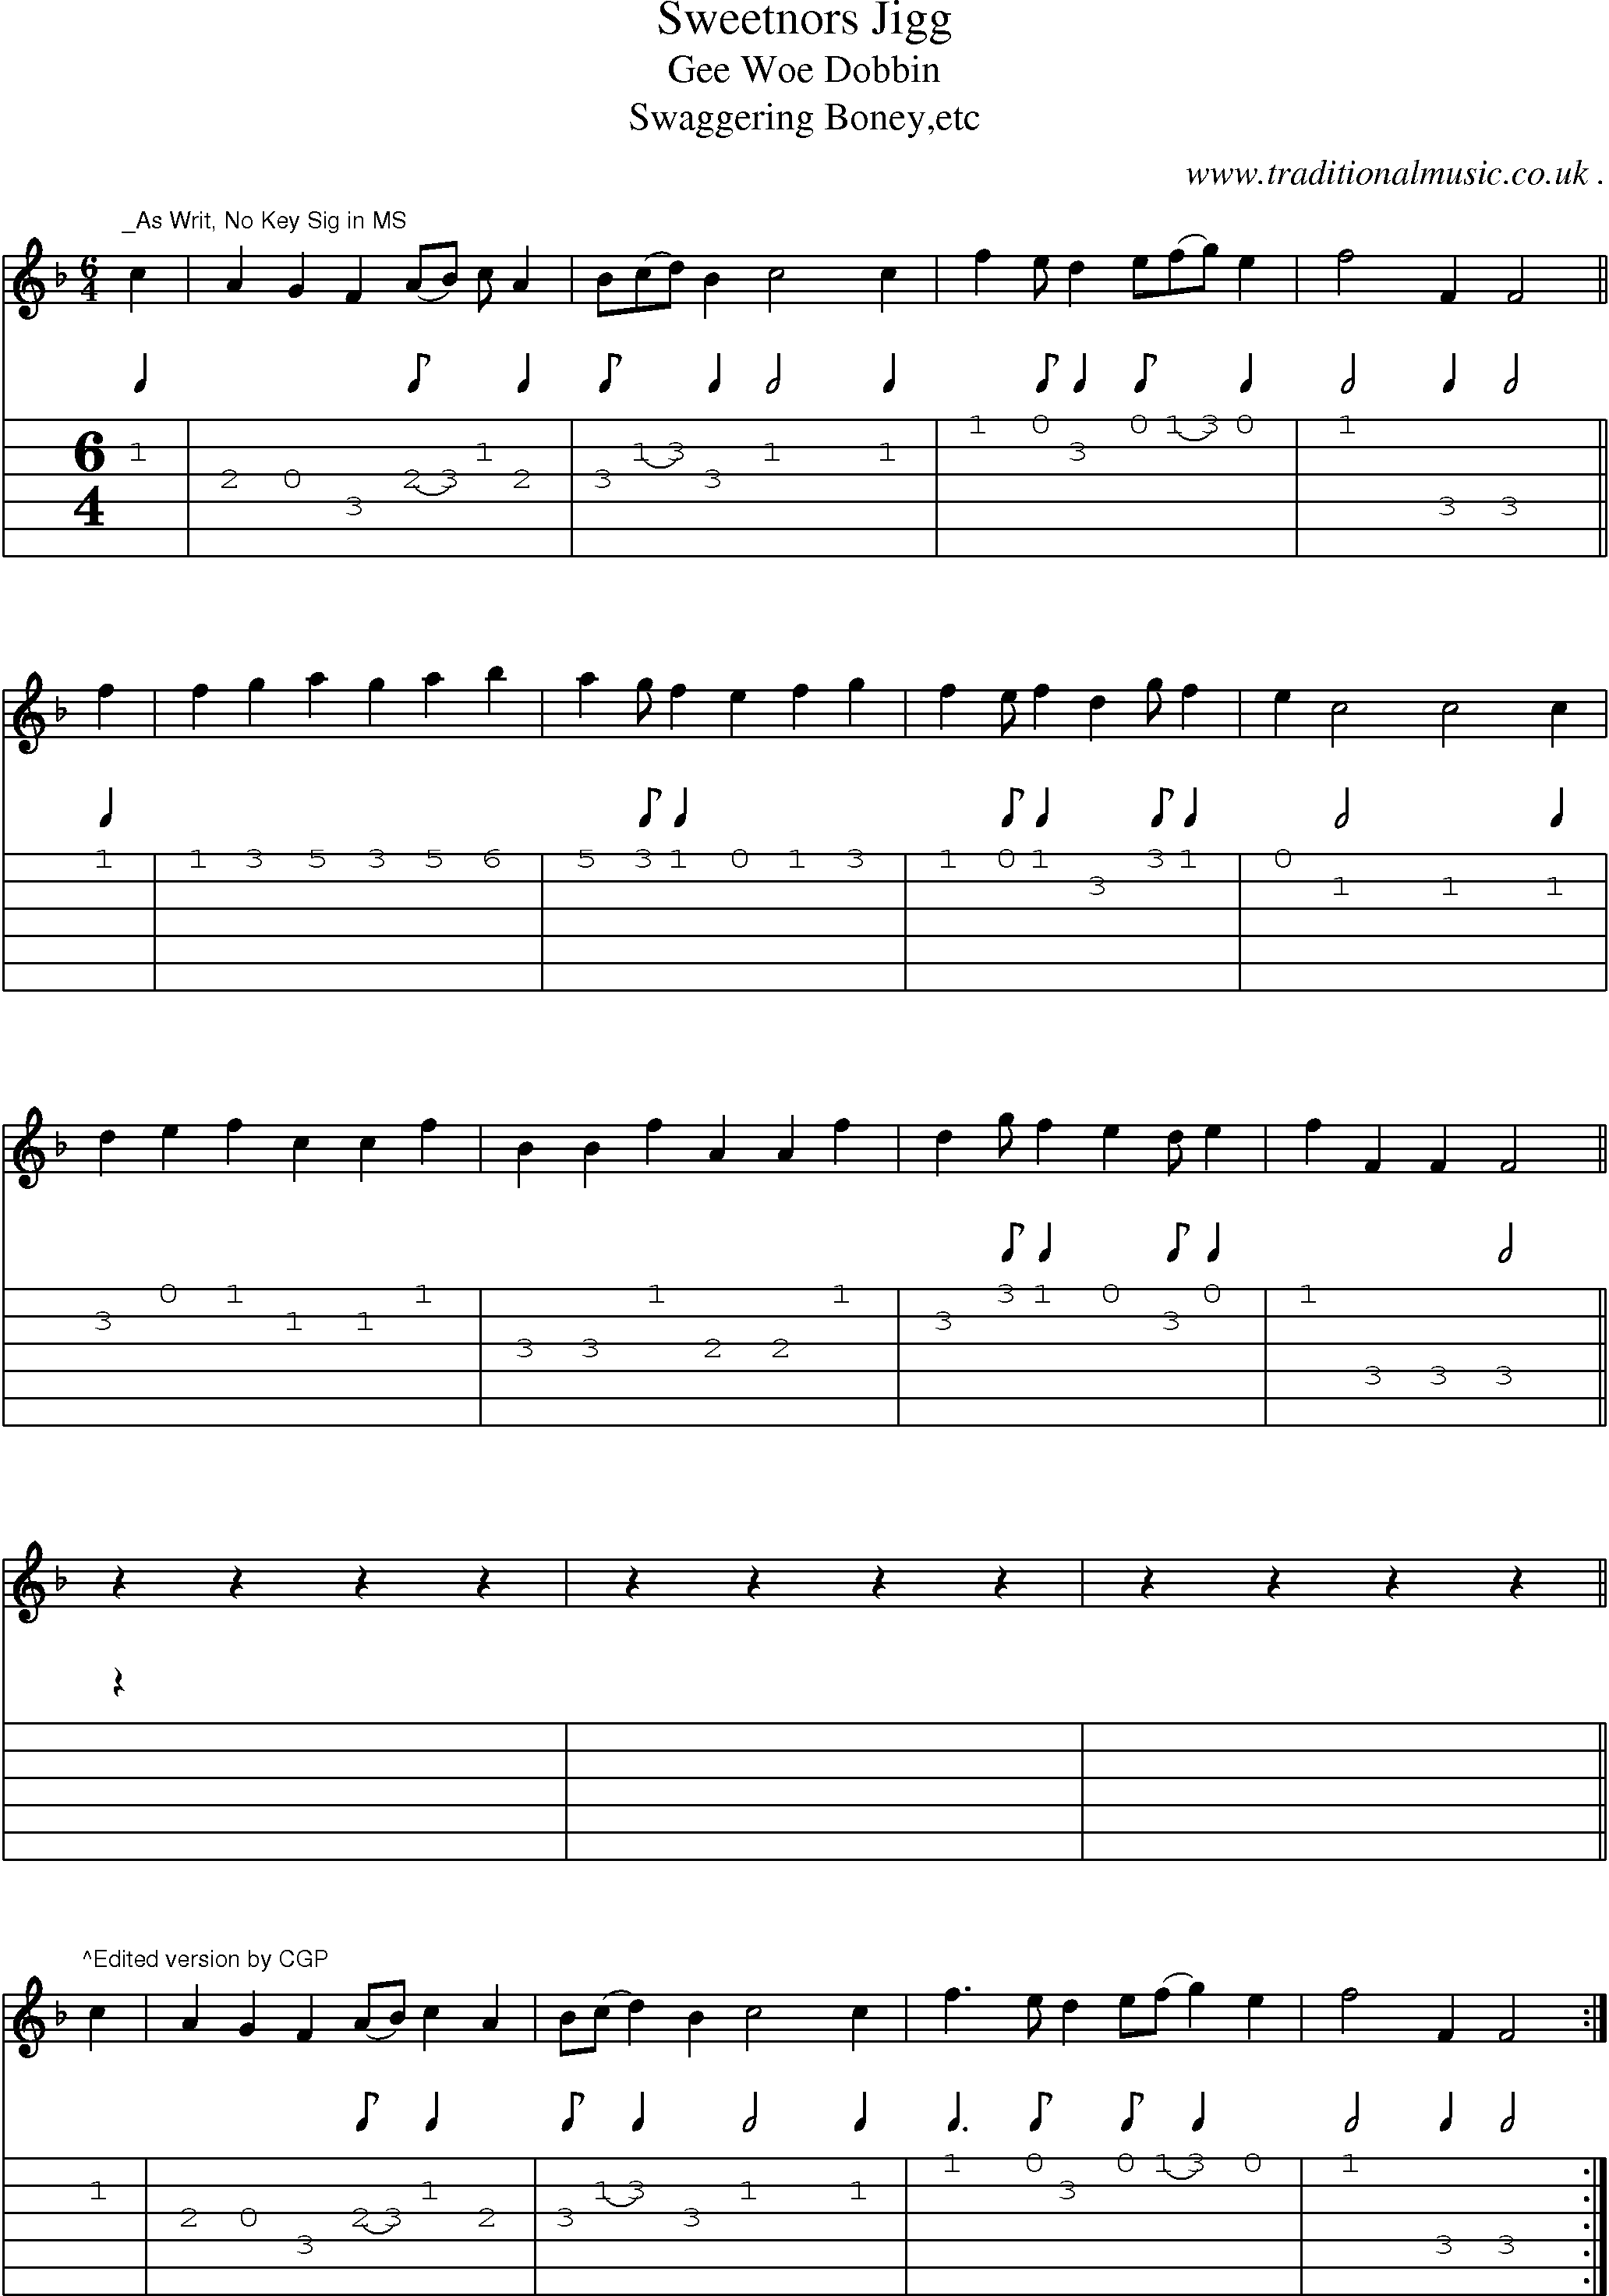 Sheet-Music and Guitar Tabs for Sweetnors Jigg